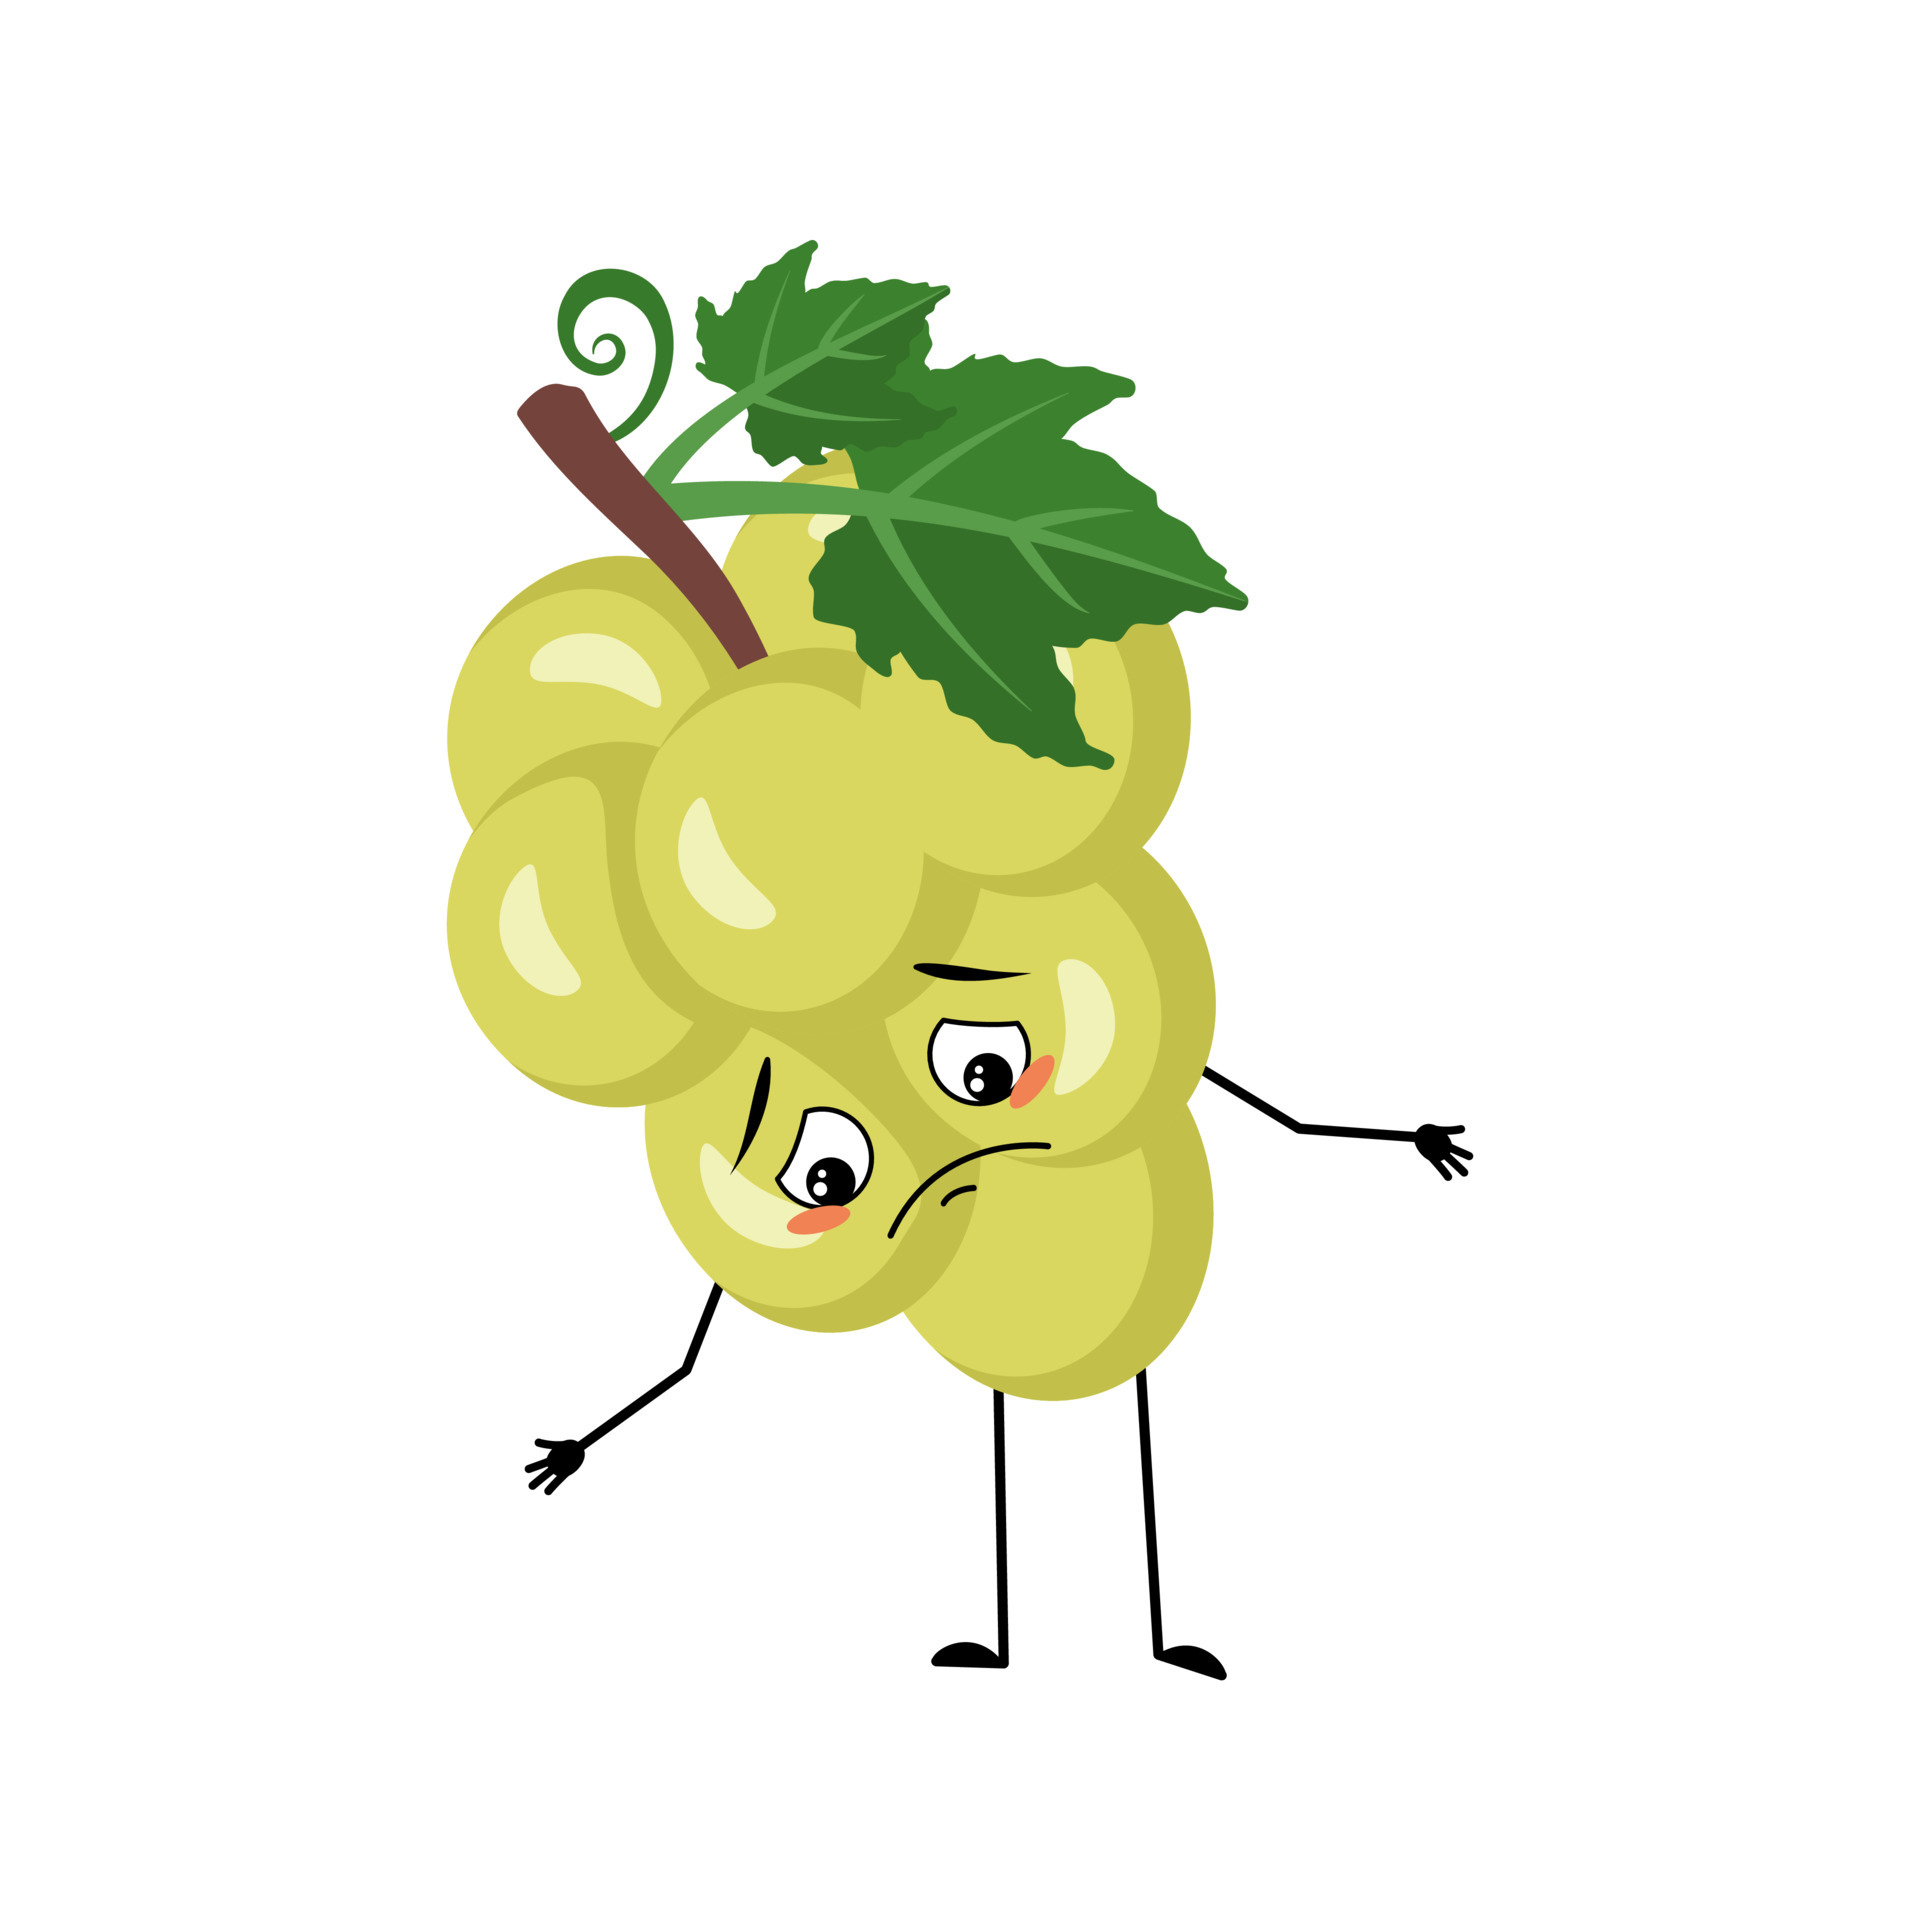 Grape character with sad emotions, depressed face, down eyes, arms and ...